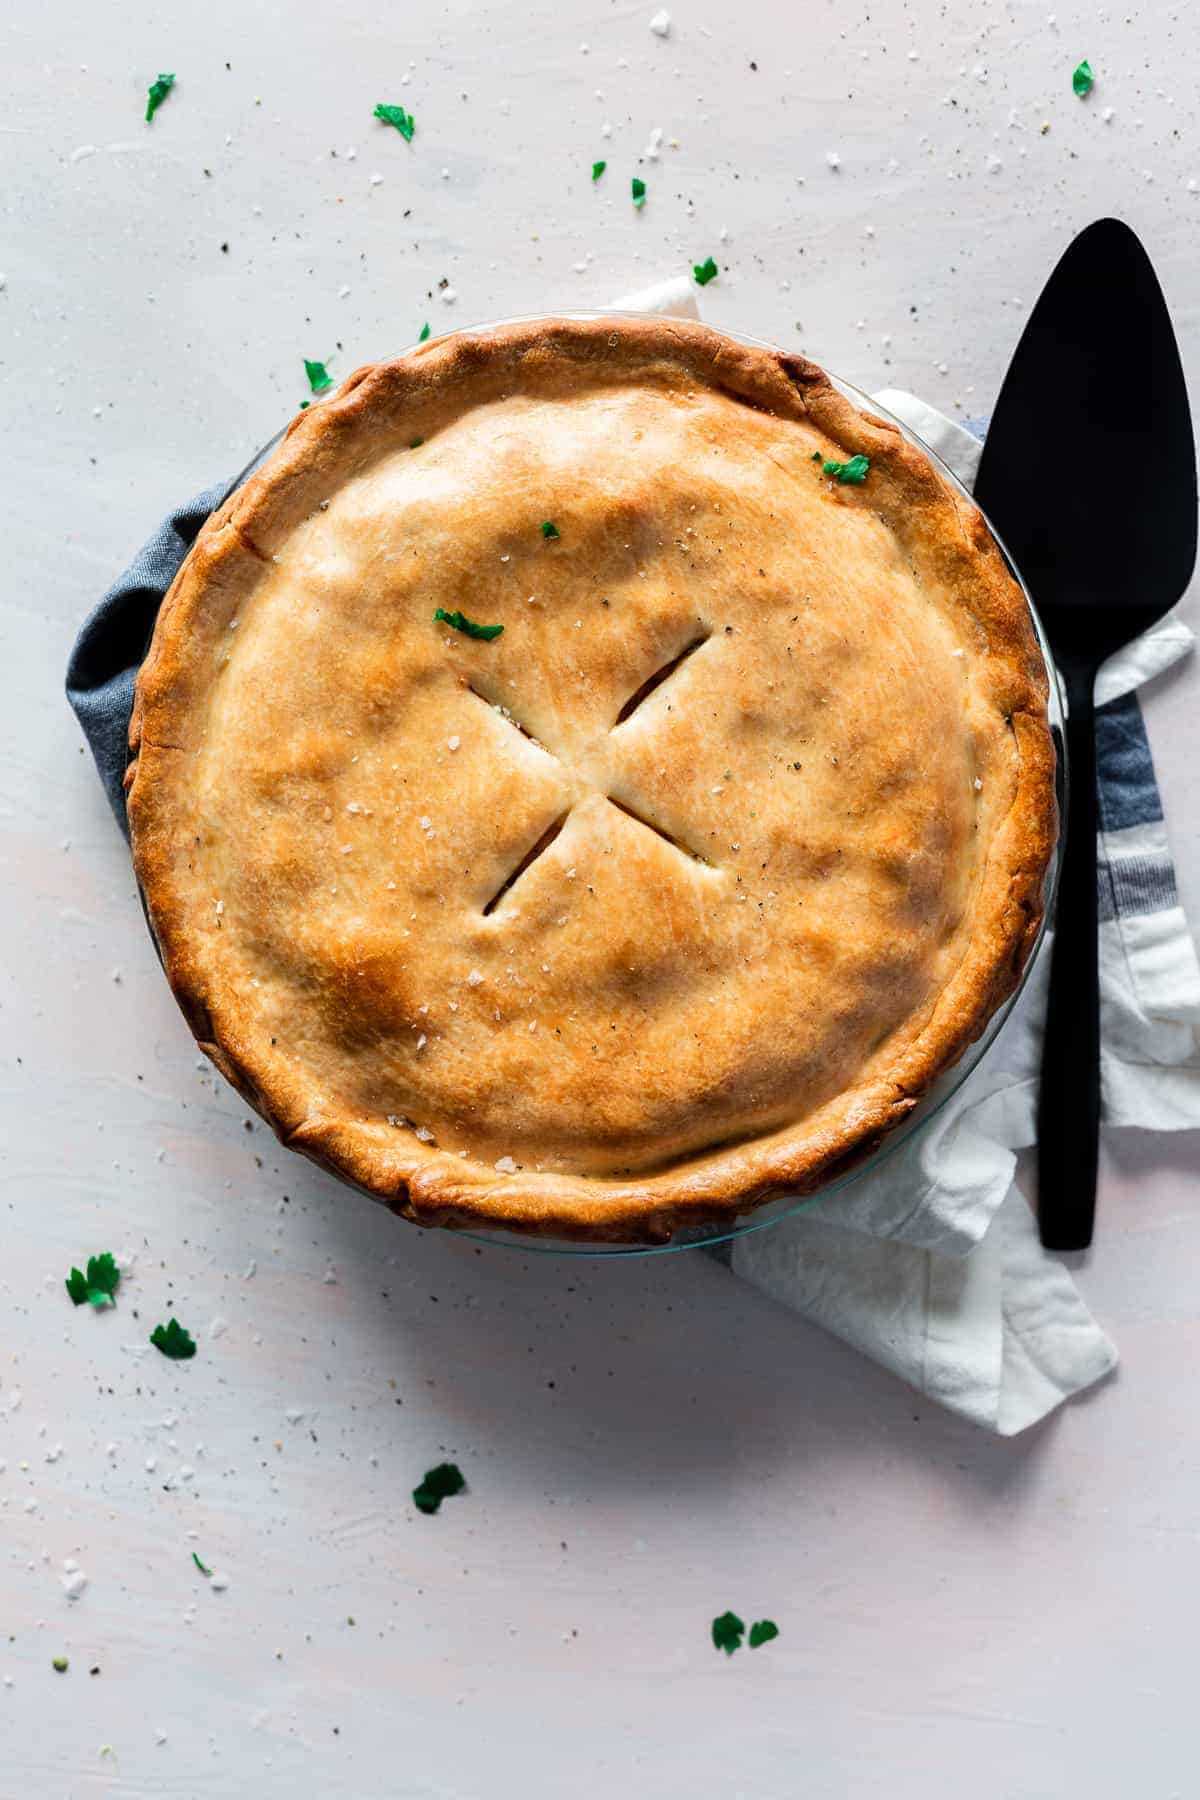 Nothing beats a piping hot homemade chicken pot pie, and this recipe is doable for all levels of home chefs, from novice to expert! I love a simple comfort food recipe, and I've been sharing hundreds of them like this one on my site for years. You can make this chicken pot pie whether you've been cooking your whole life or have hardly touched your oven and want to give a simple recipe a spin! #chickenpotpie #chickenpotpierecipe #potpie #chickenrecipes #comfortfood 